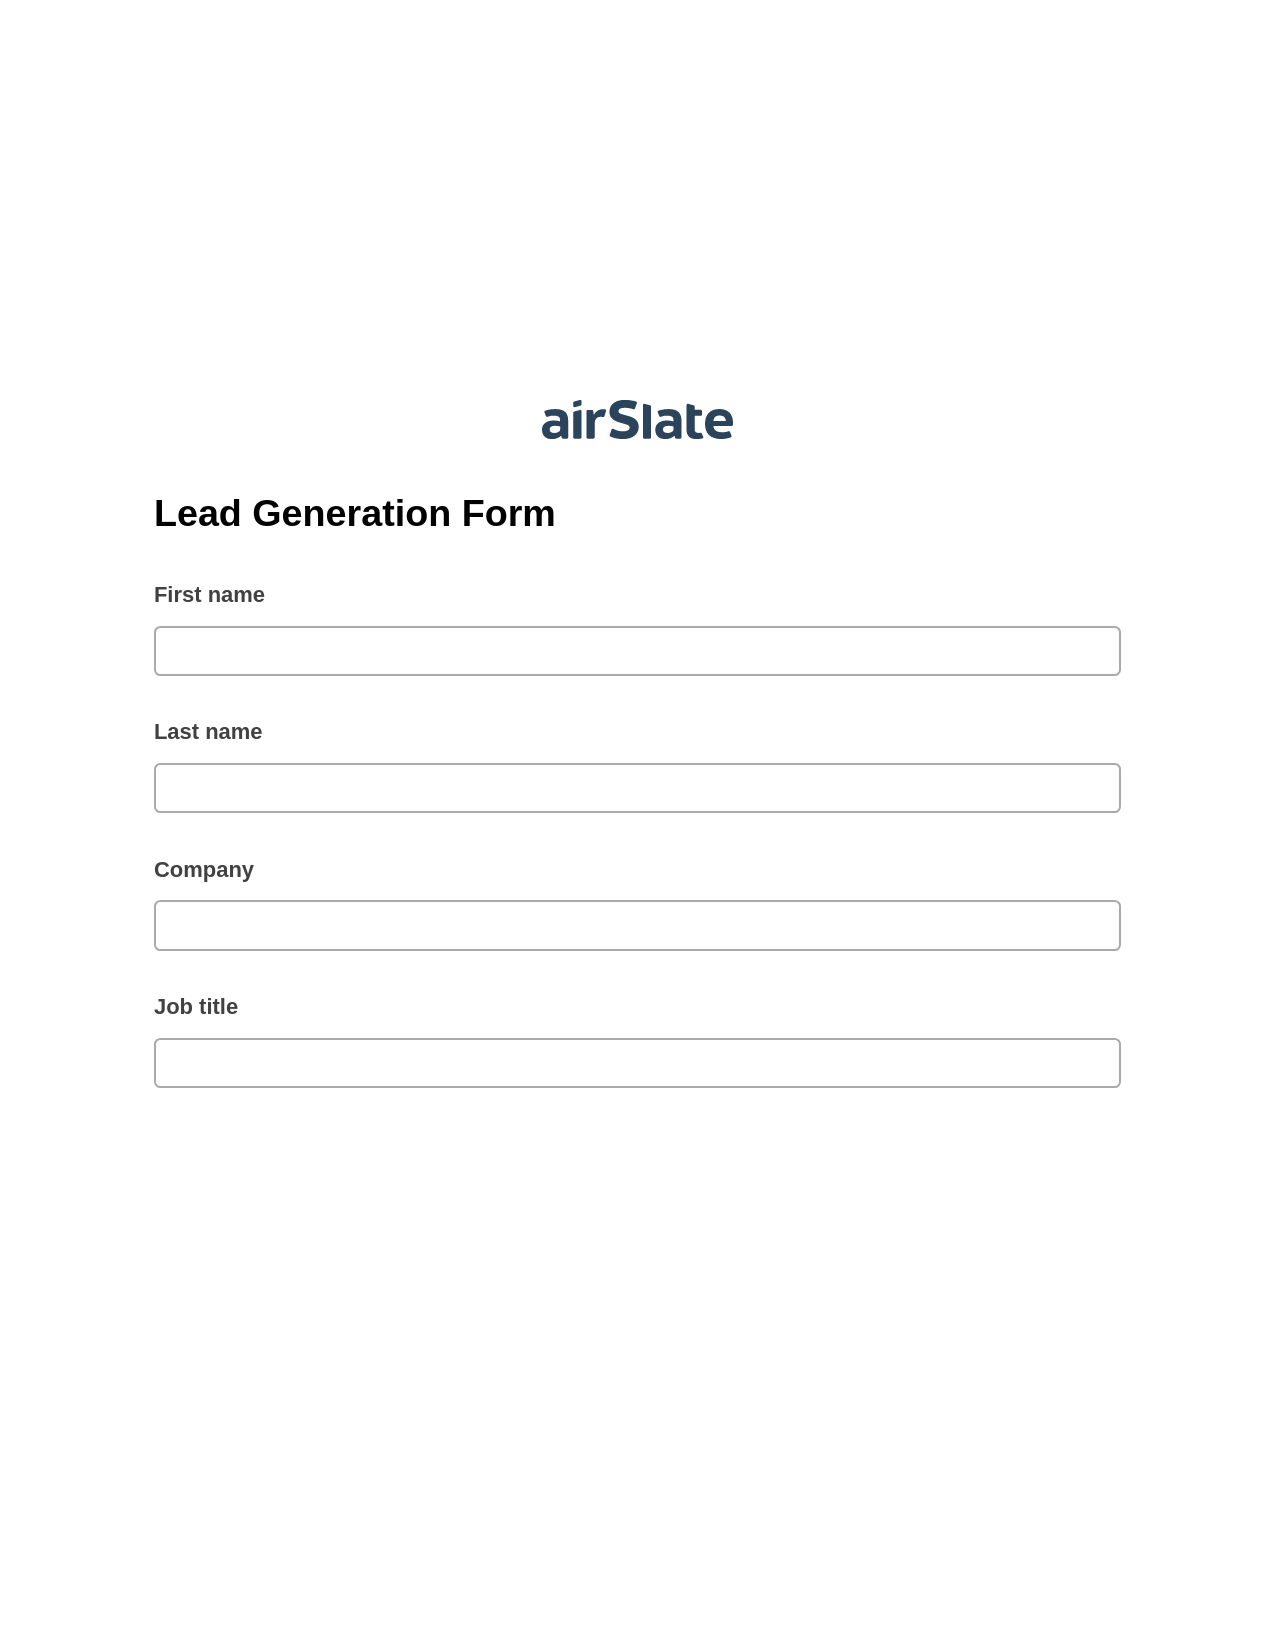 Lead Generation Form Pre-fill from Salesforce Records with SOQL Bot, Send a Slate with Roles Bot, Export to Excel 365 Bot